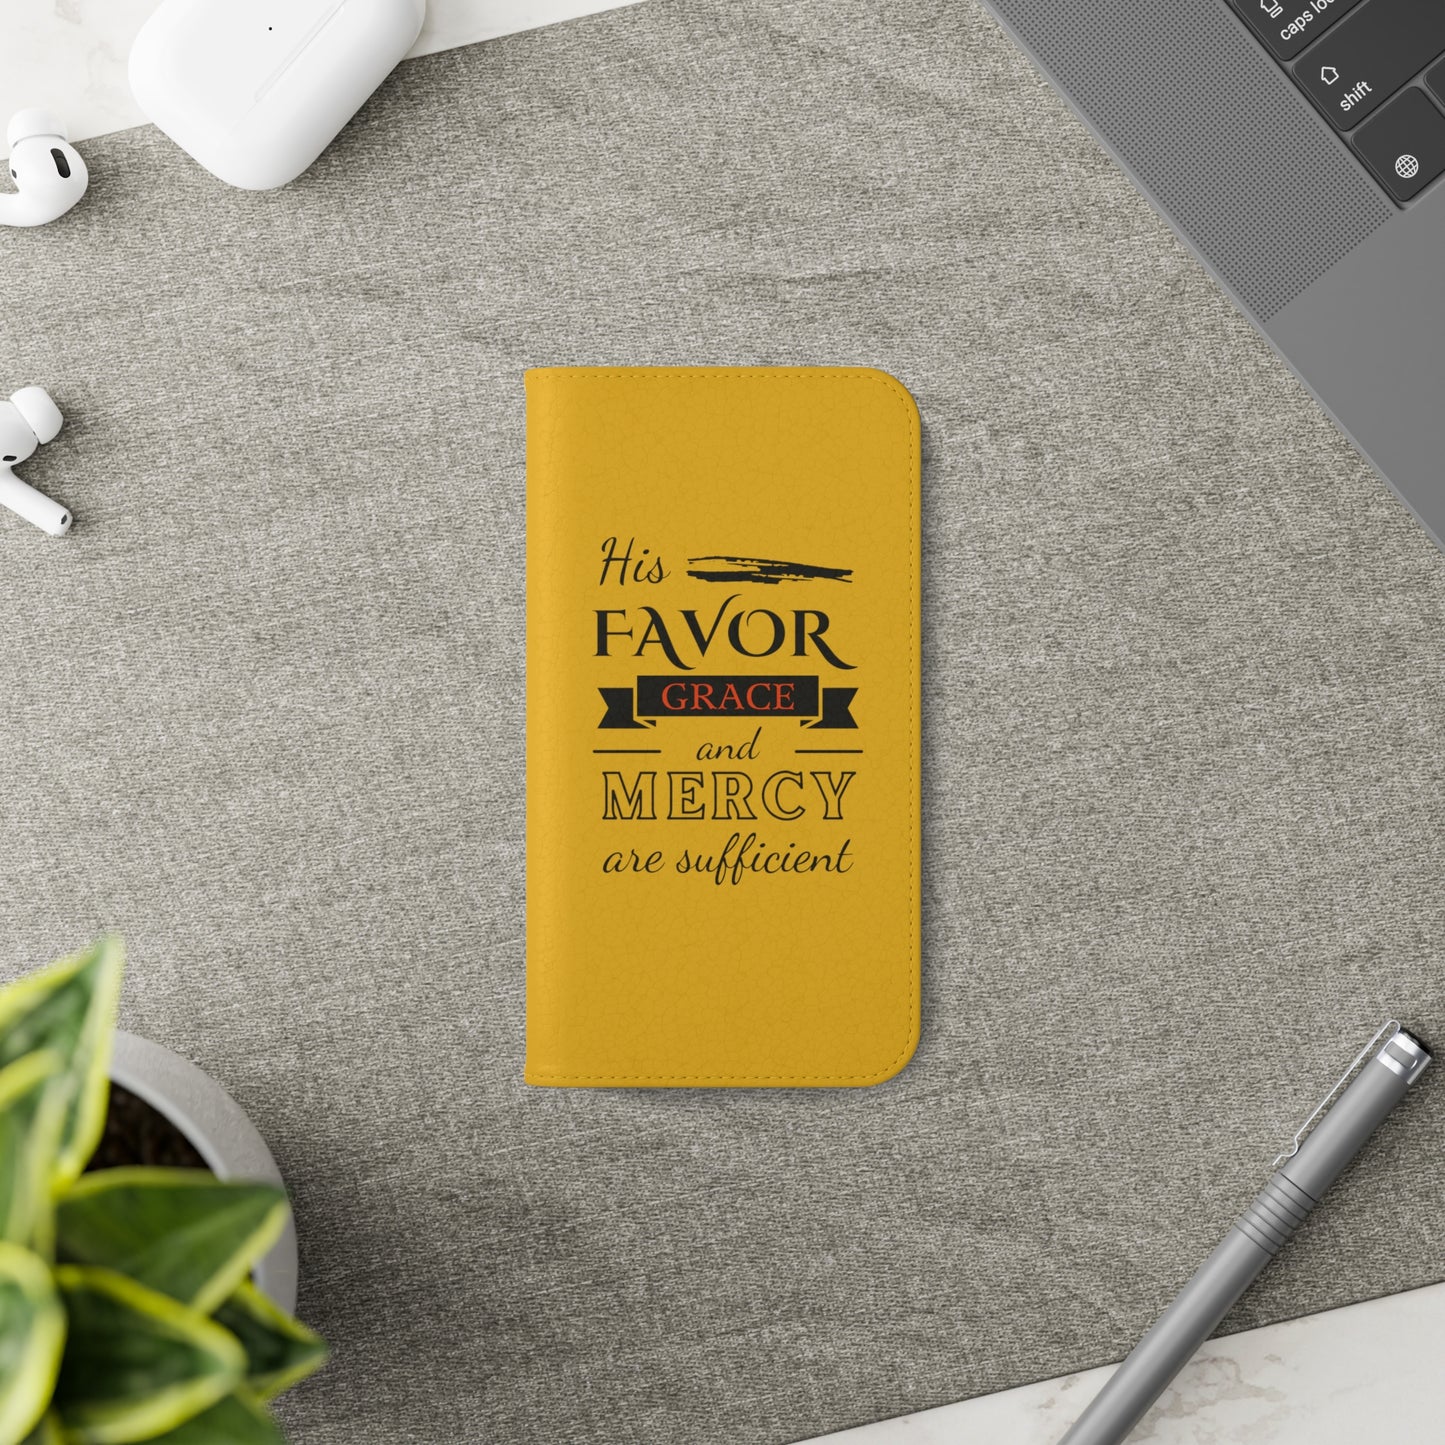 His Favor Grace & Mercy Are Sufficient Phone Flip Cases